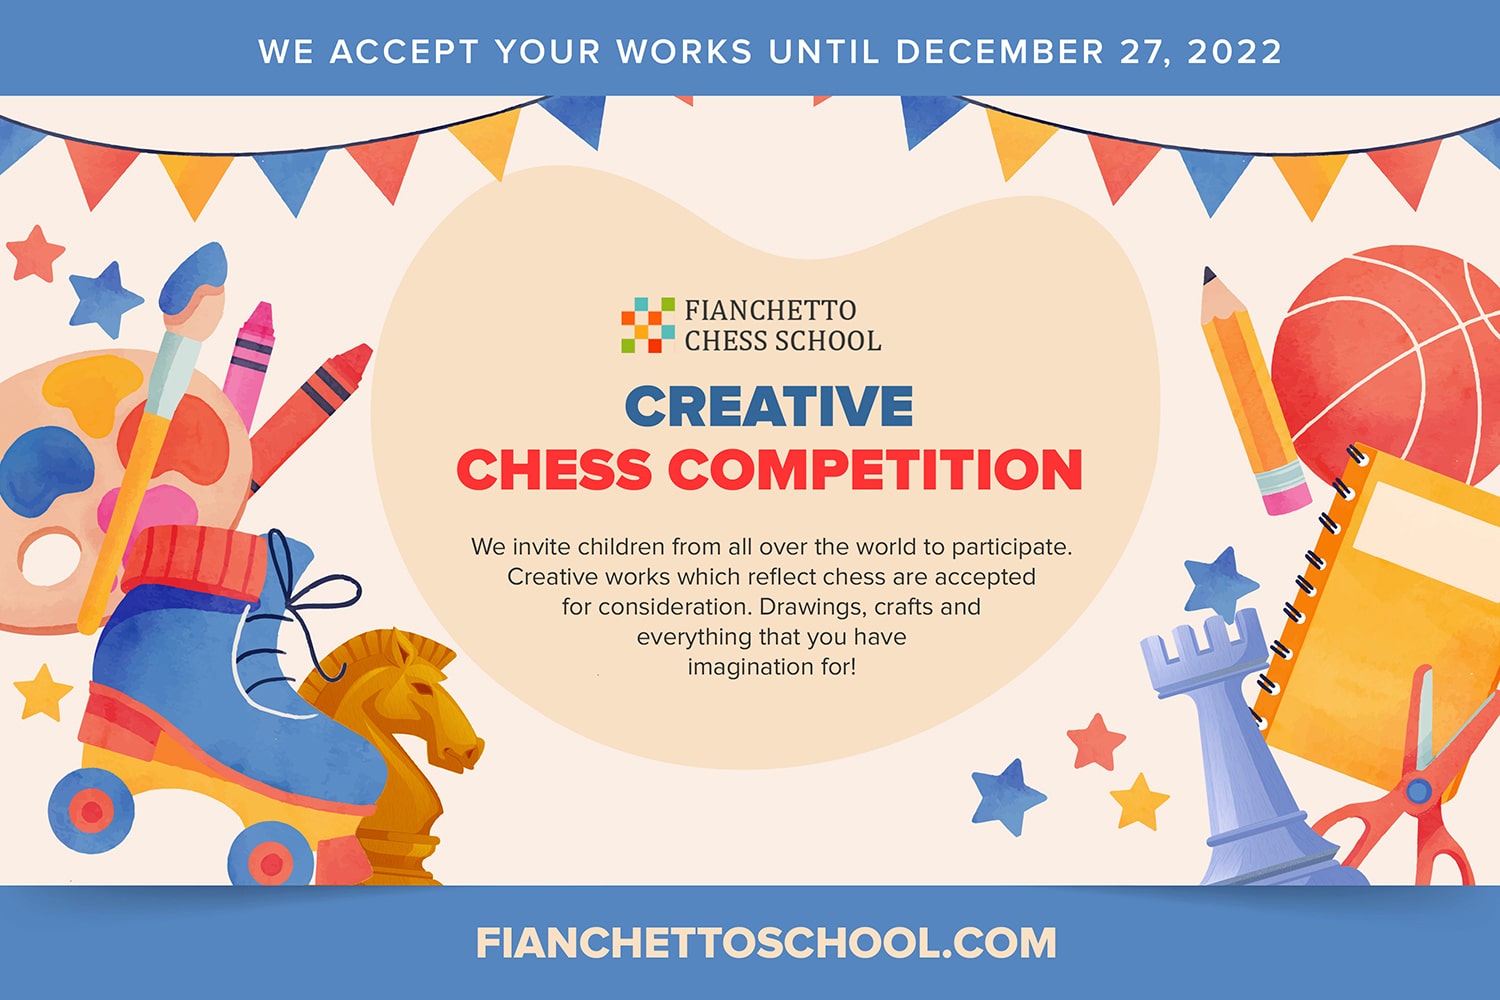 CREATIVE CHESS COMPETITION 2022